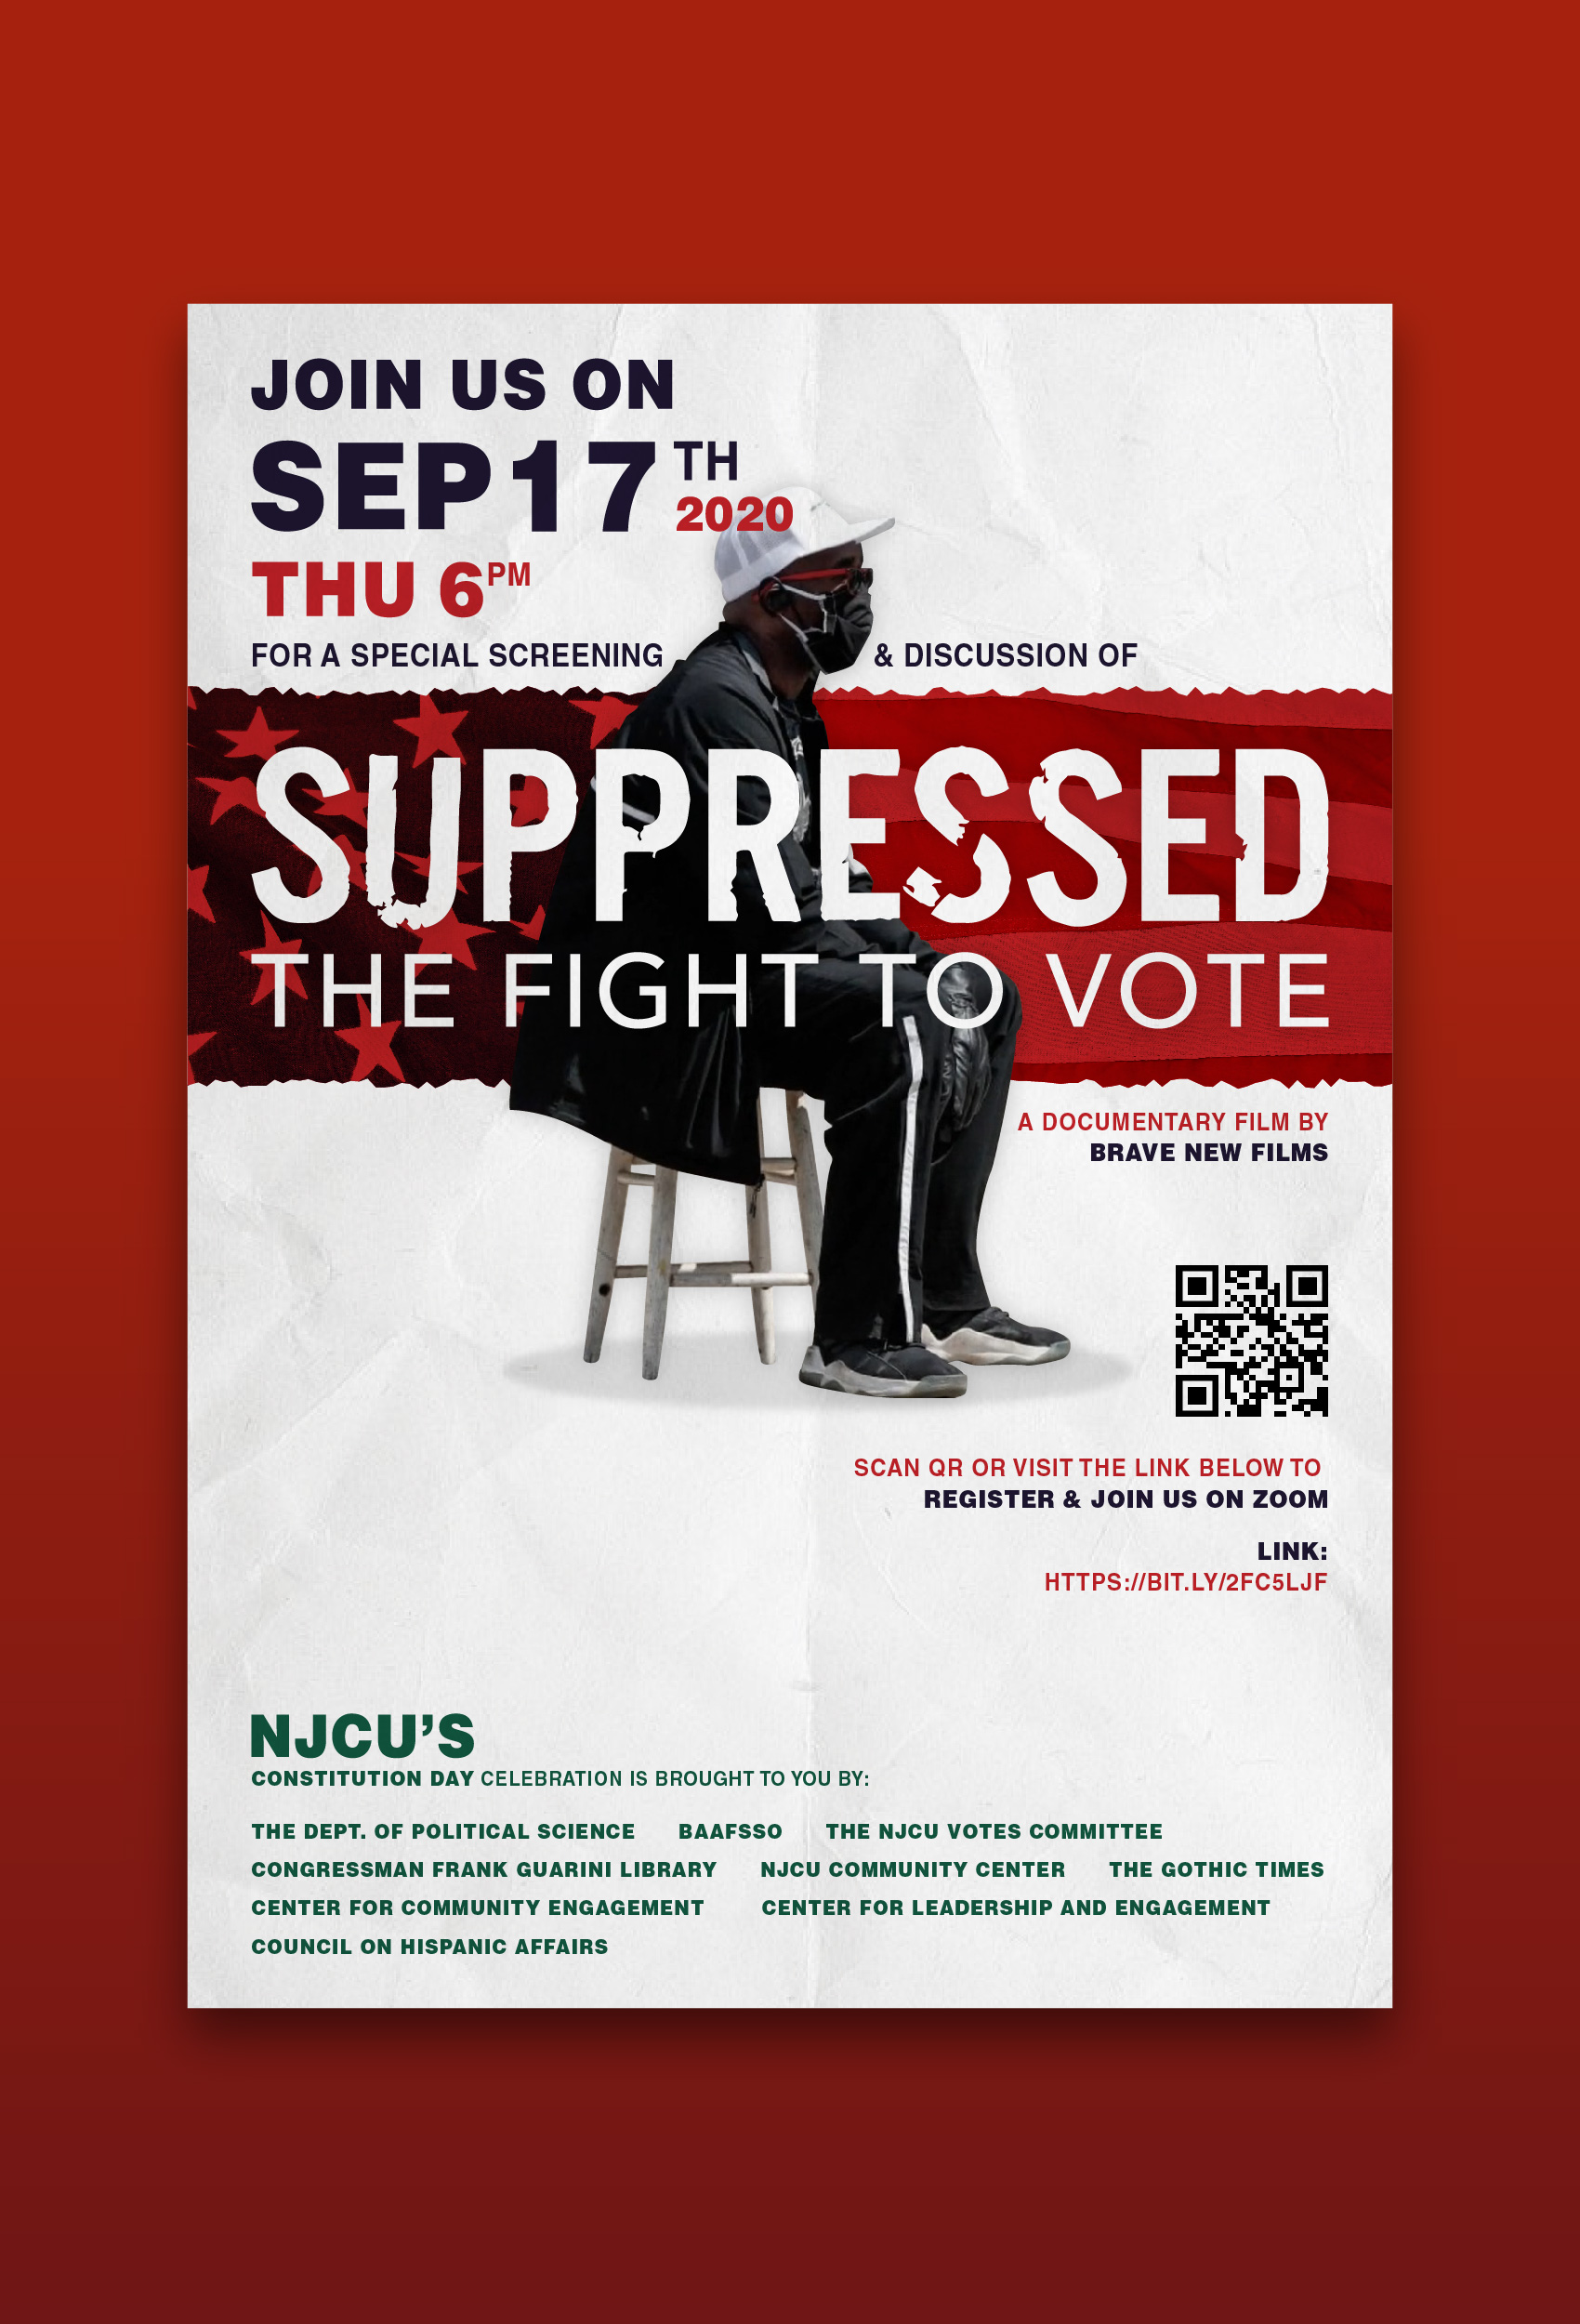 An image of the flyer designed for Suppressed